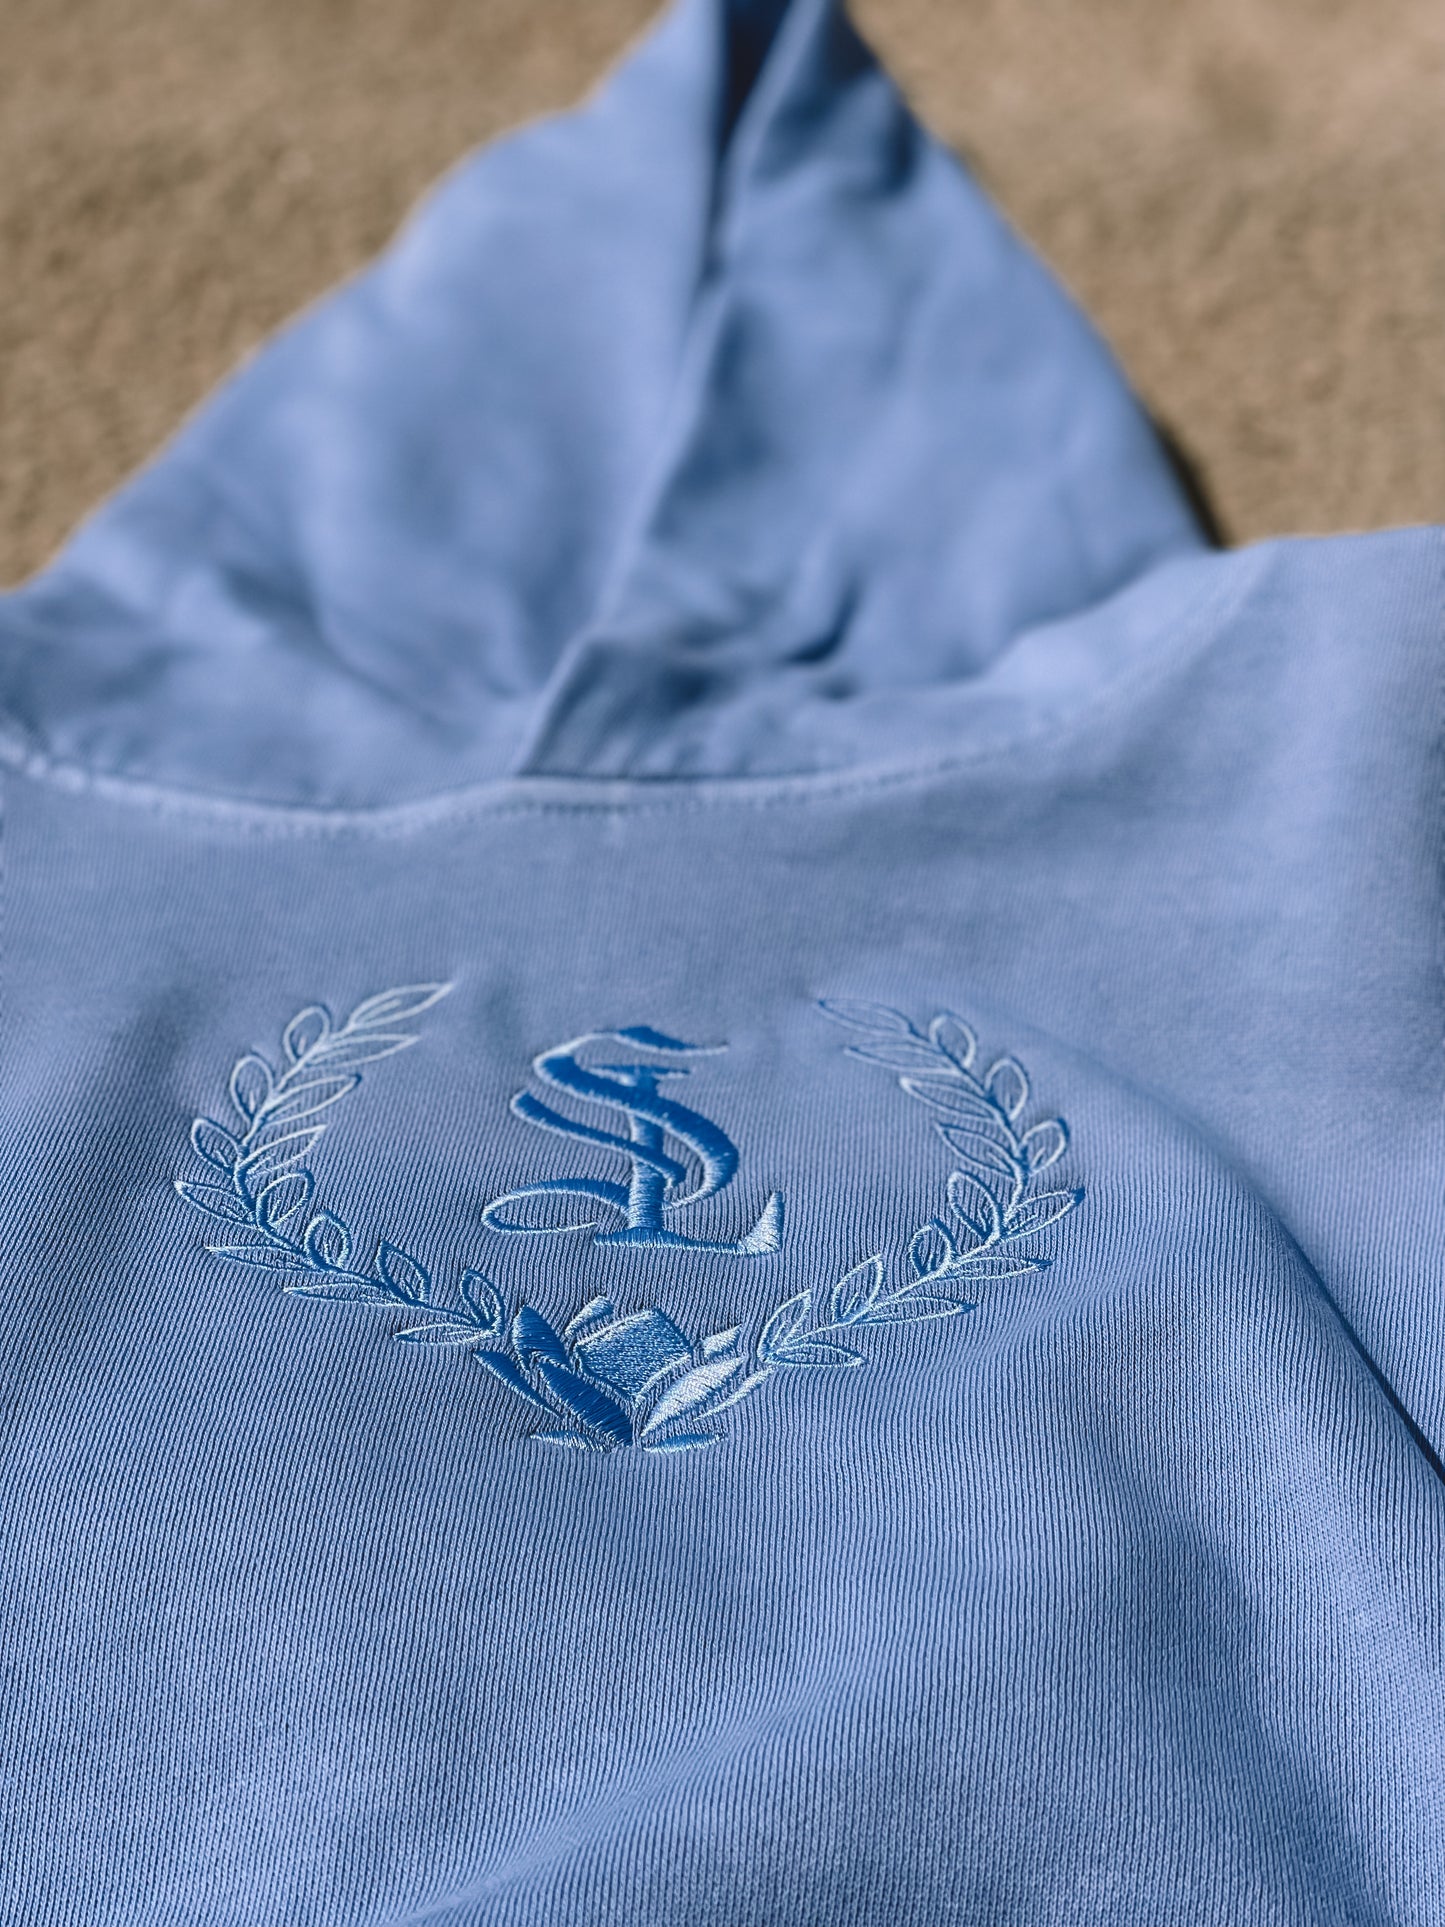 Lotus Crest - Embroidered Sweatsuit Top - Grape Ice - Urban Hoodie